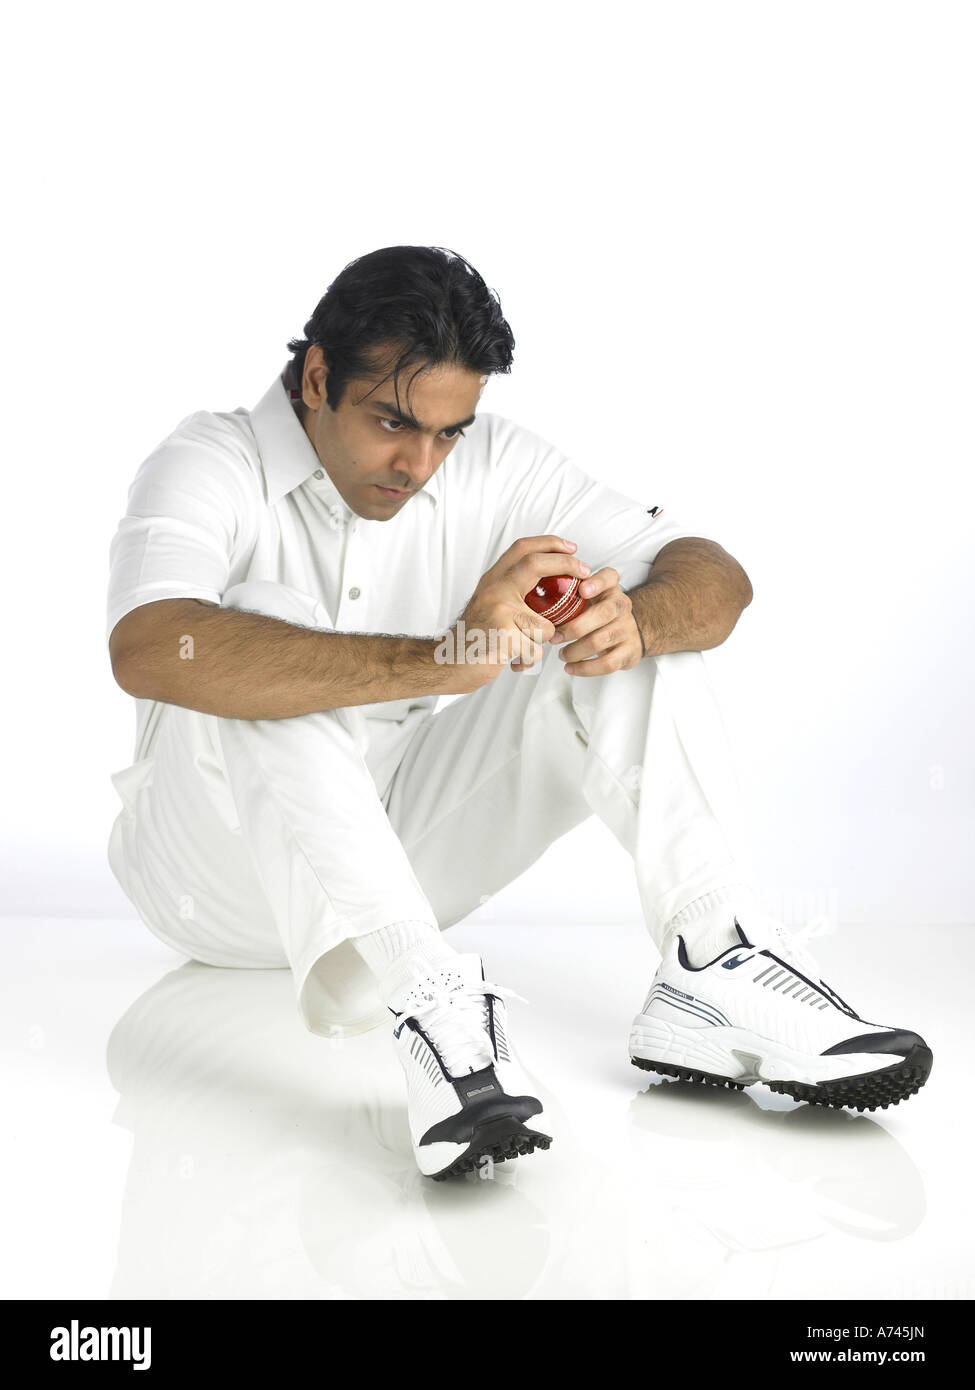 VDA 201786 Indian bowler sitting and looking at ball MR 702A Stock Photo